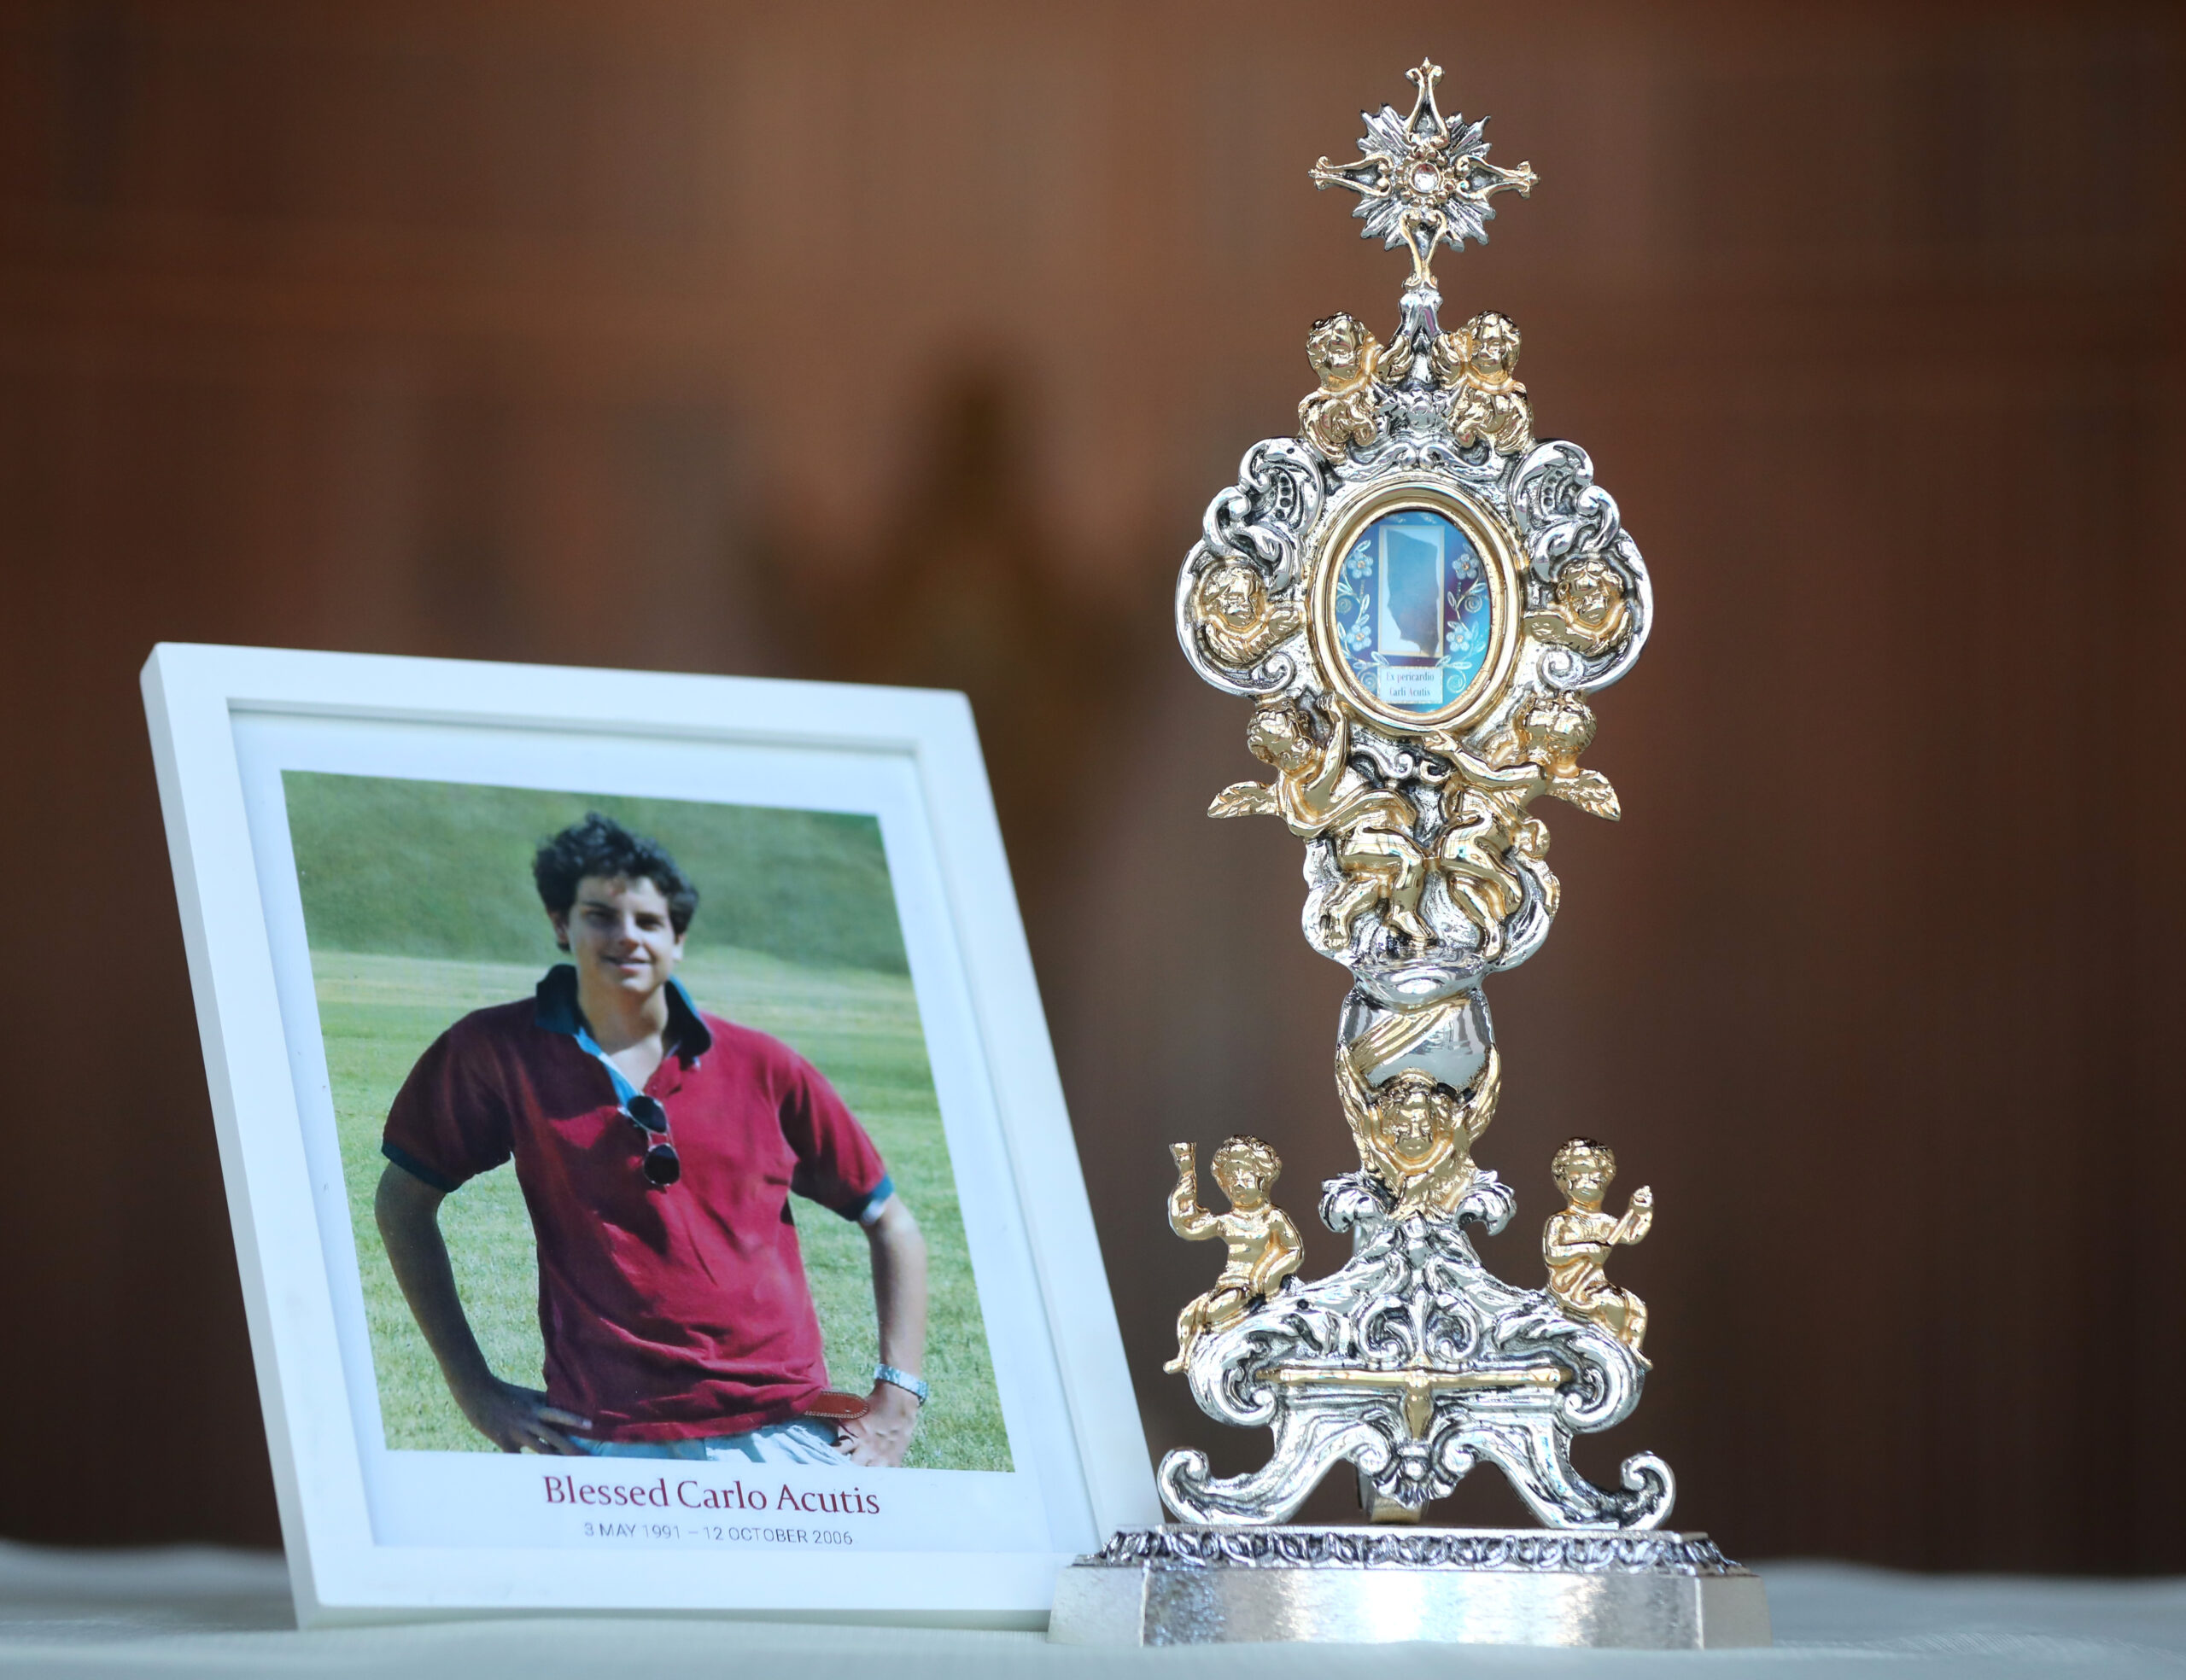 Blessed Carlo Acutis relics tour to stop in archdiocese The Leaven